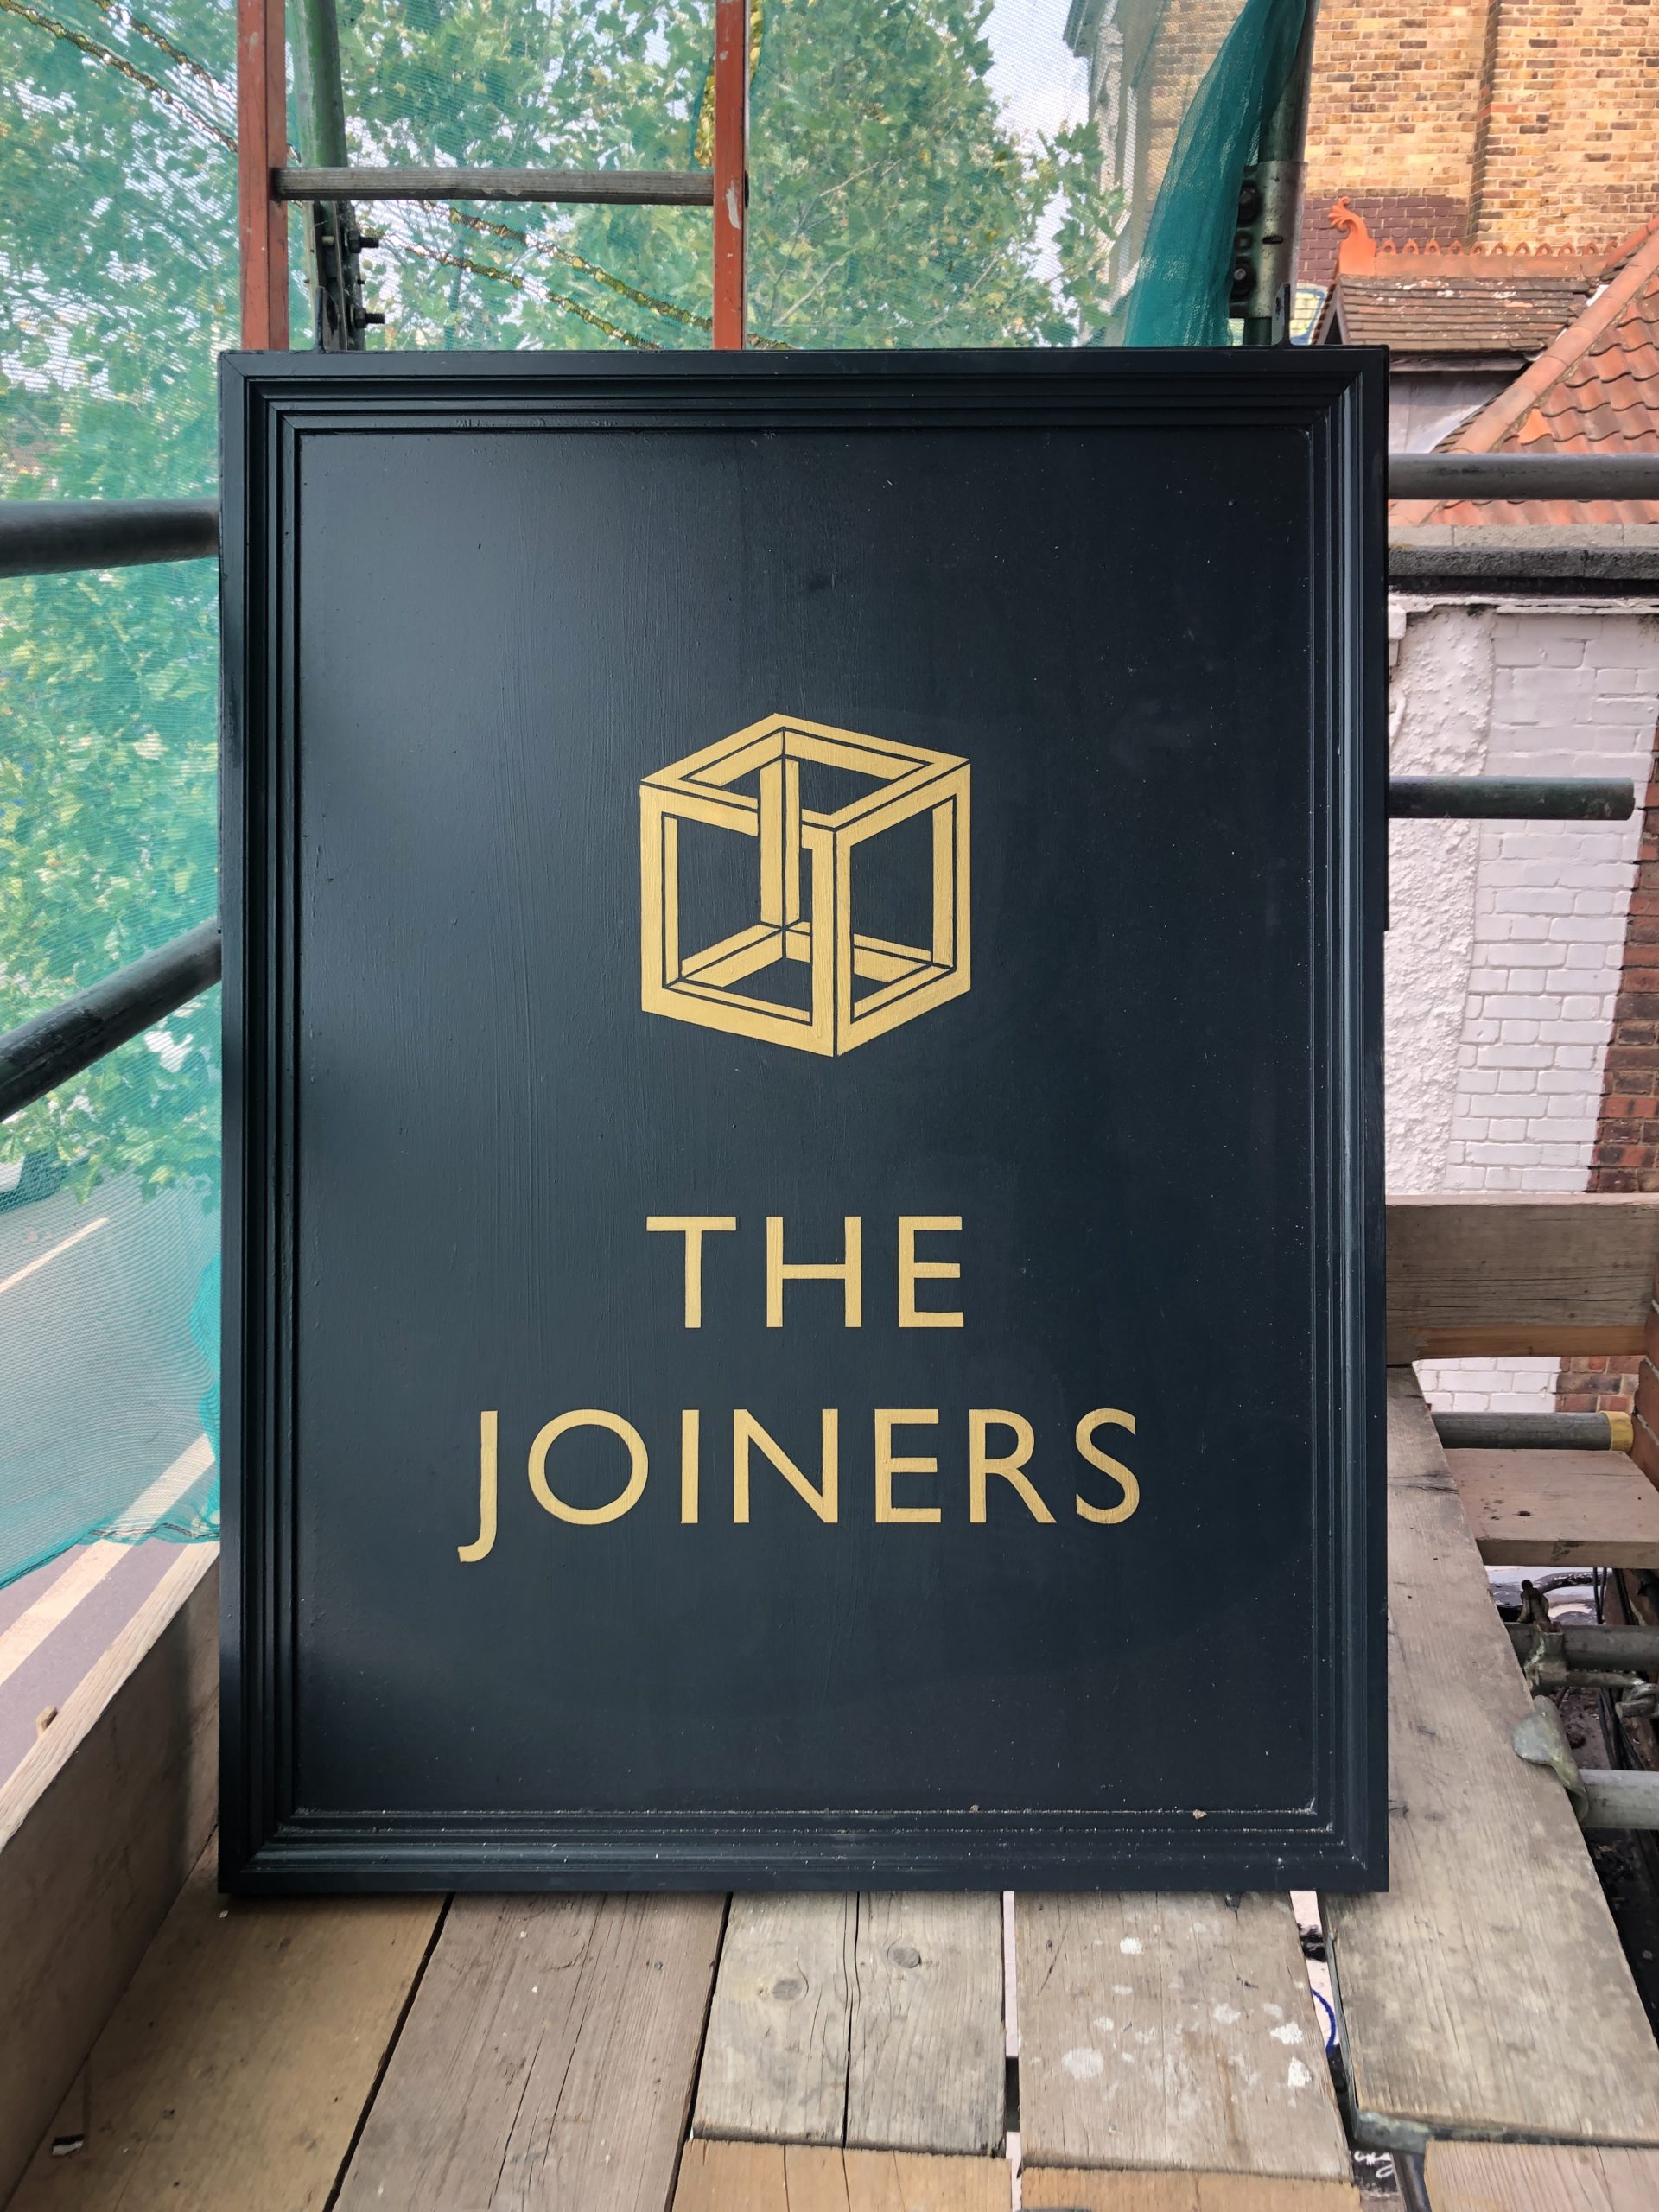 NGS London Pub signs